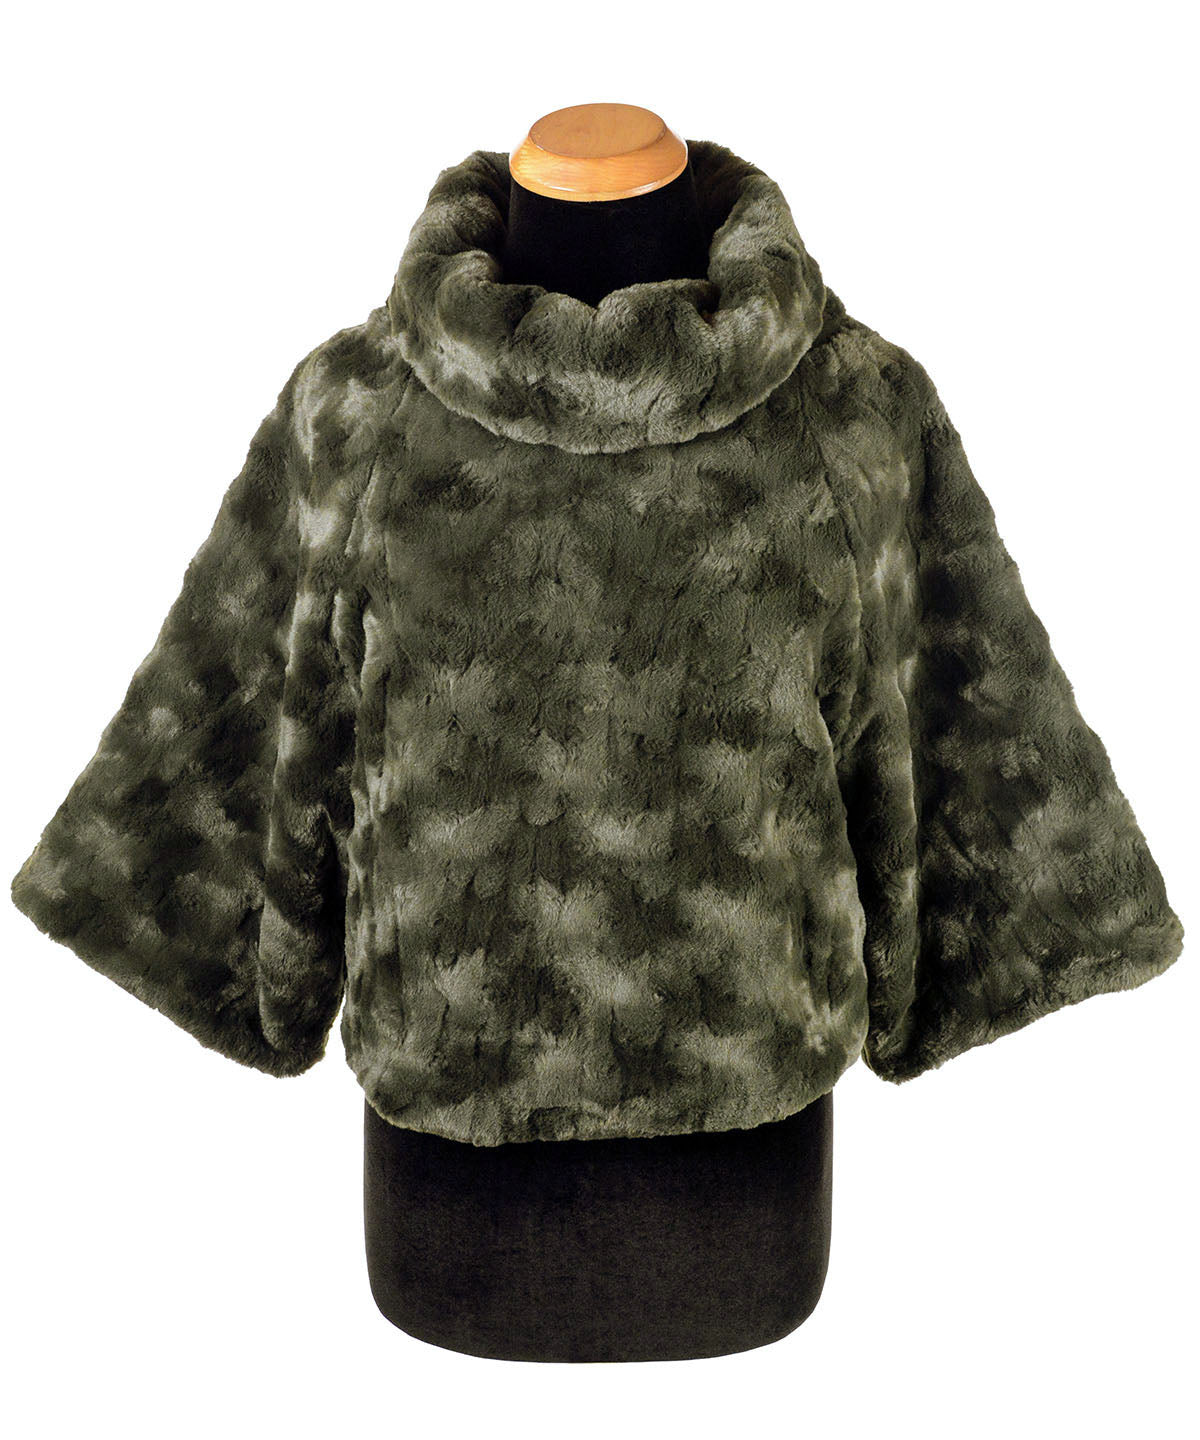 Woman grabbing hair and wearing cropped Sweater Top in Army Green Cuddly Faux Fur | Handmade in Seattle WA | Pandemonium Millinery